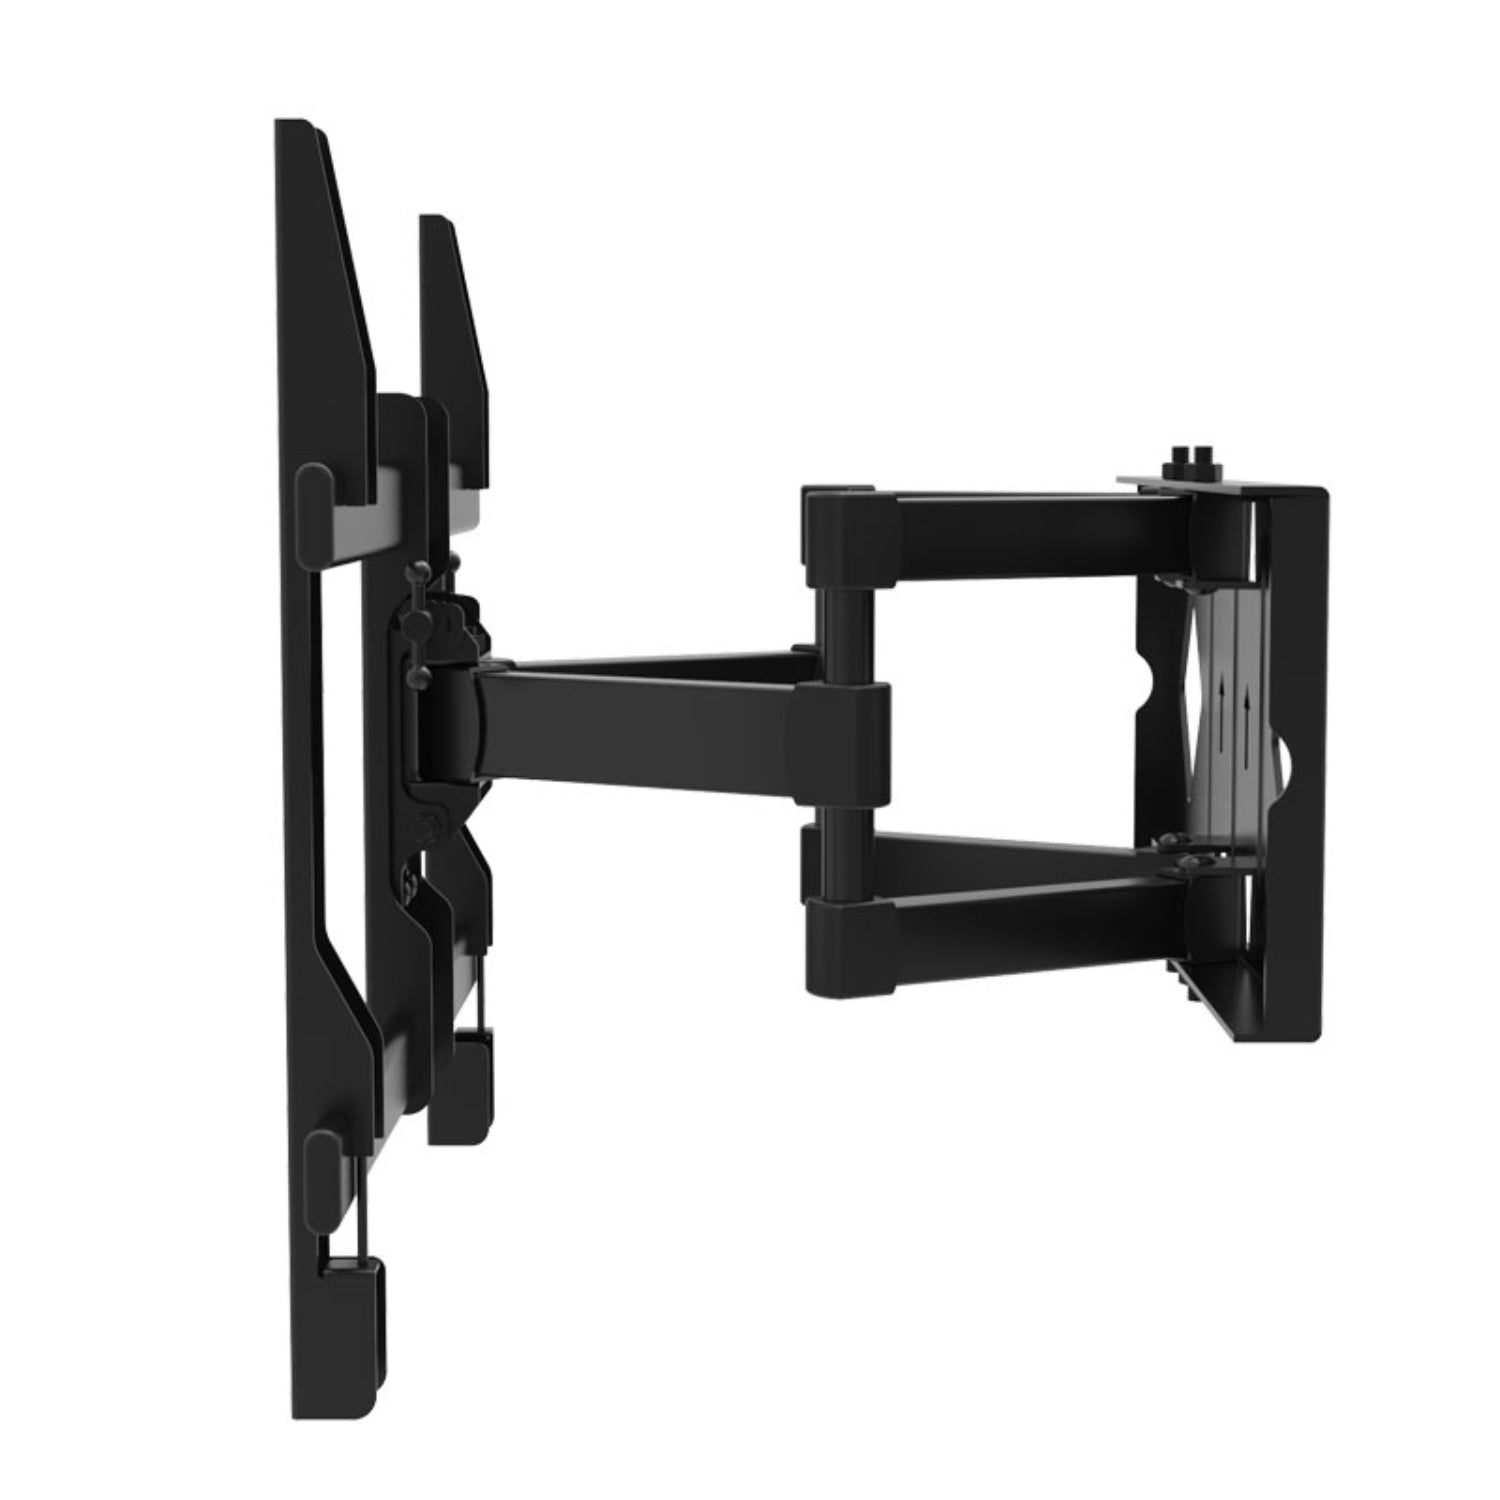 ViscoLogic Clench Adjustable Articulating TV Wall Mount Suitable for 32" - 65" TV's